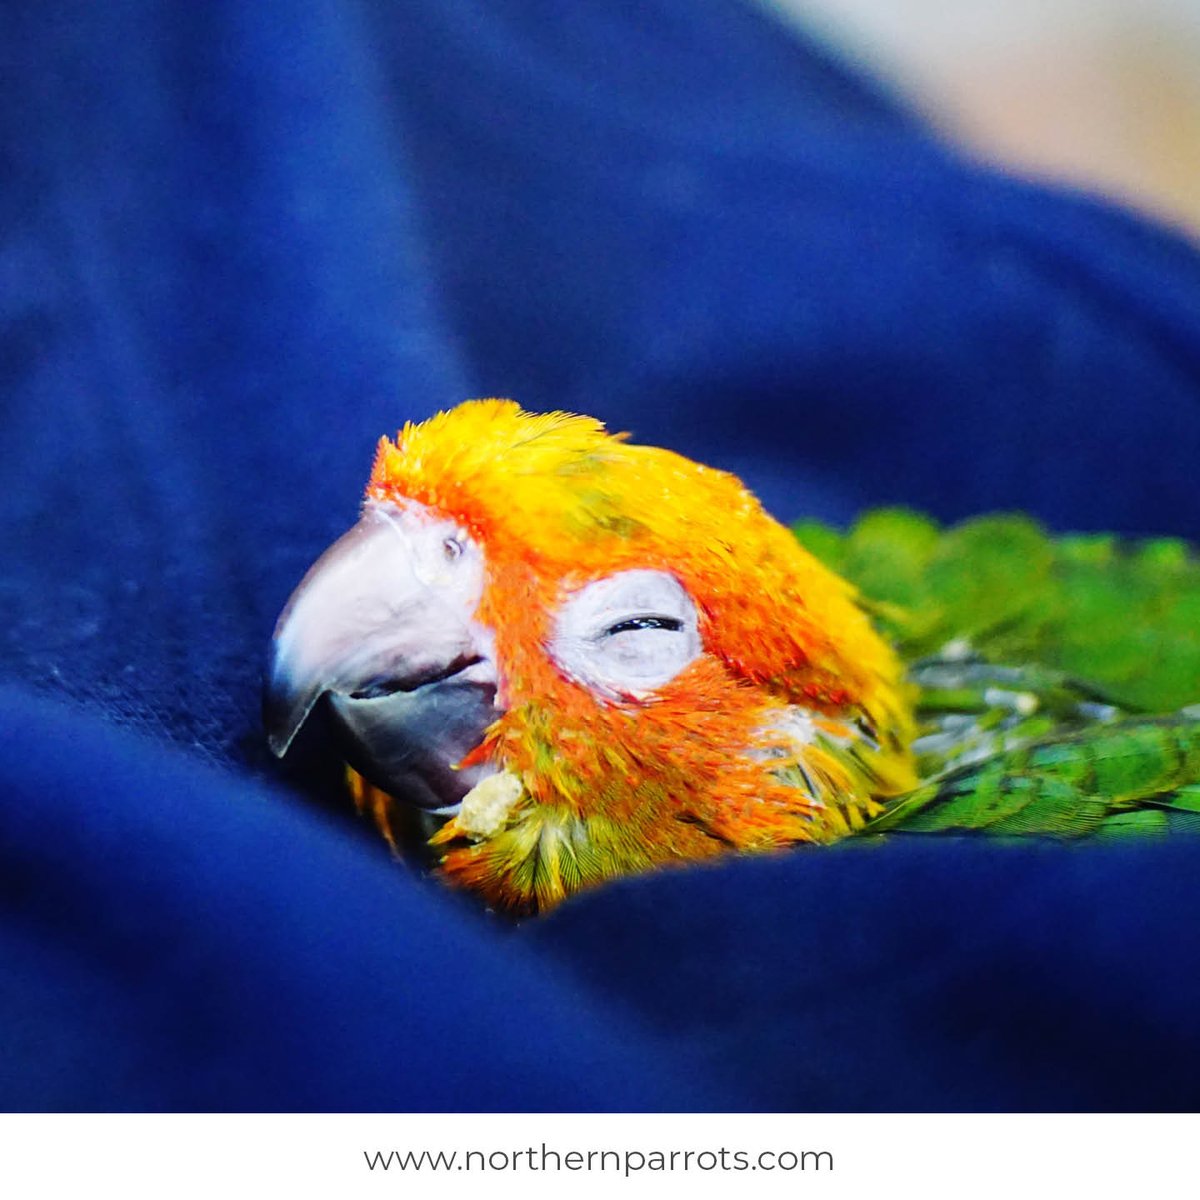 Post pictures of your Parrot napping. Let's see some cute photos.